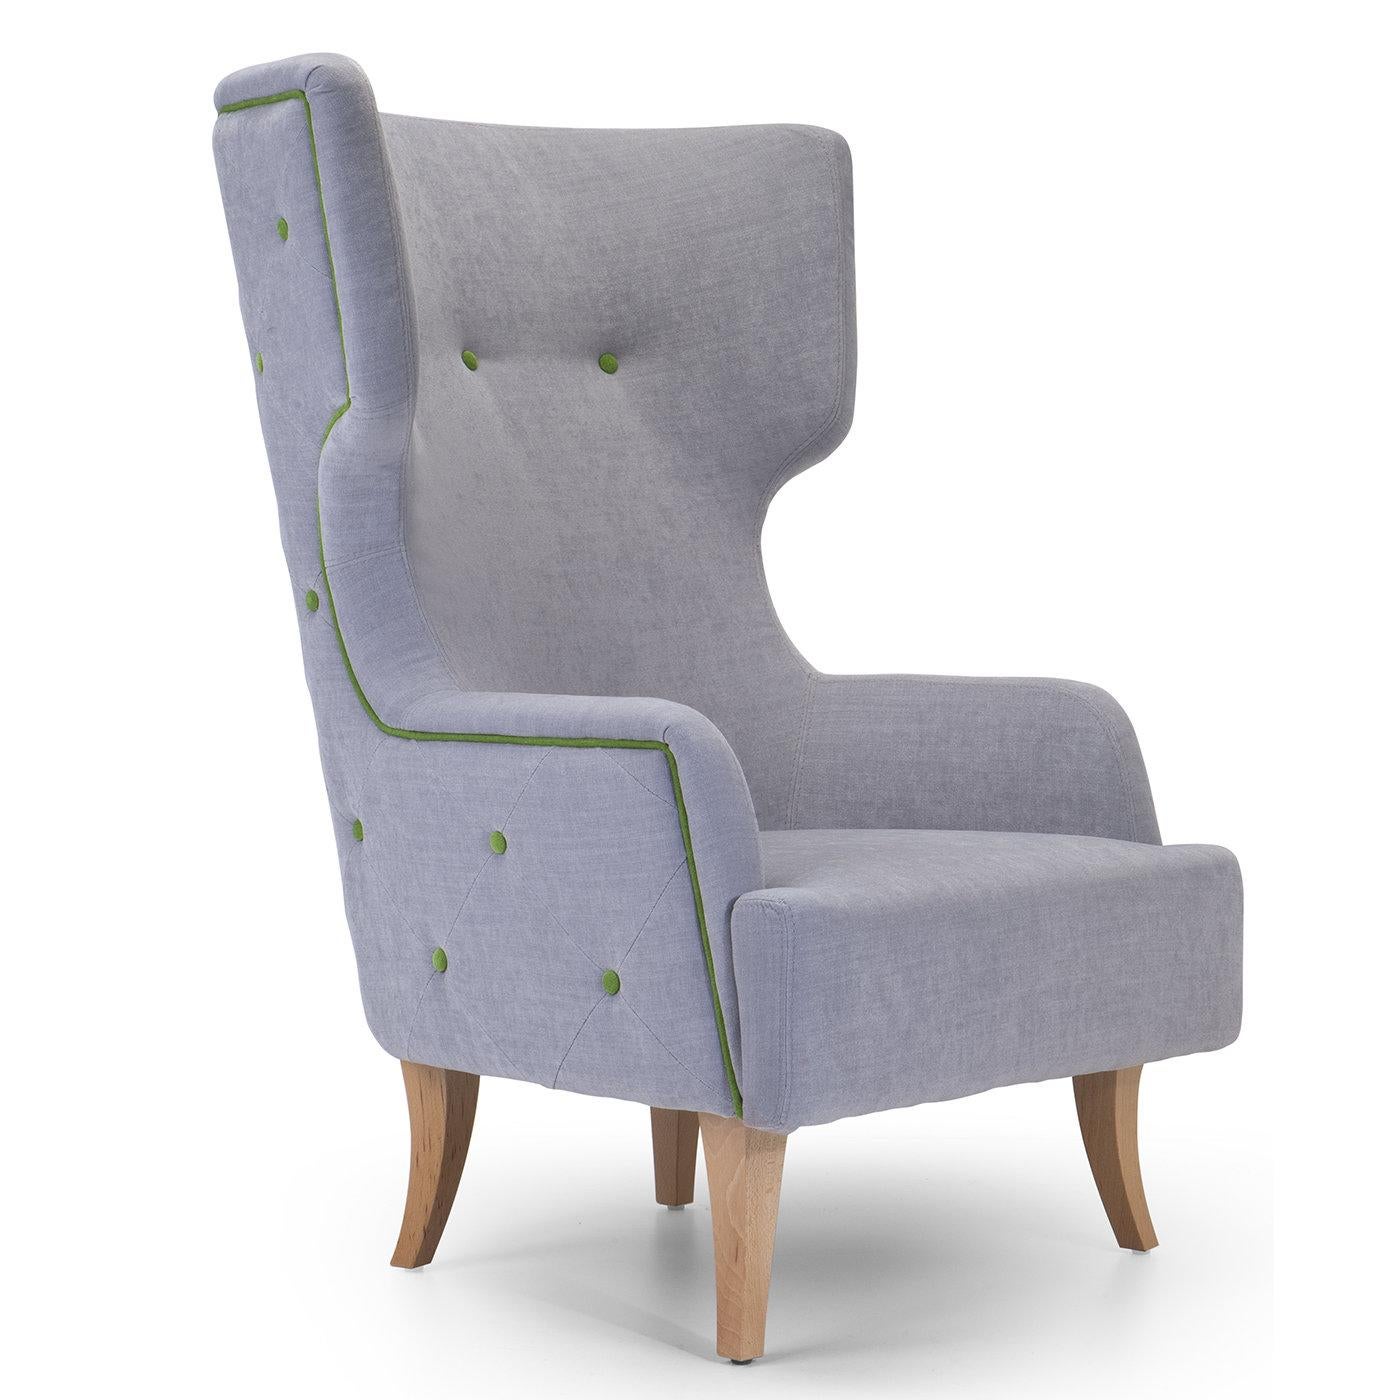 Characterized by a strong visual aesthetic that will suit both contemporary and traditional decors, this wingback armchair is both refined and inviting. The sinuous saber legs have a natural finish that complements the light gray Dacron upholstery,